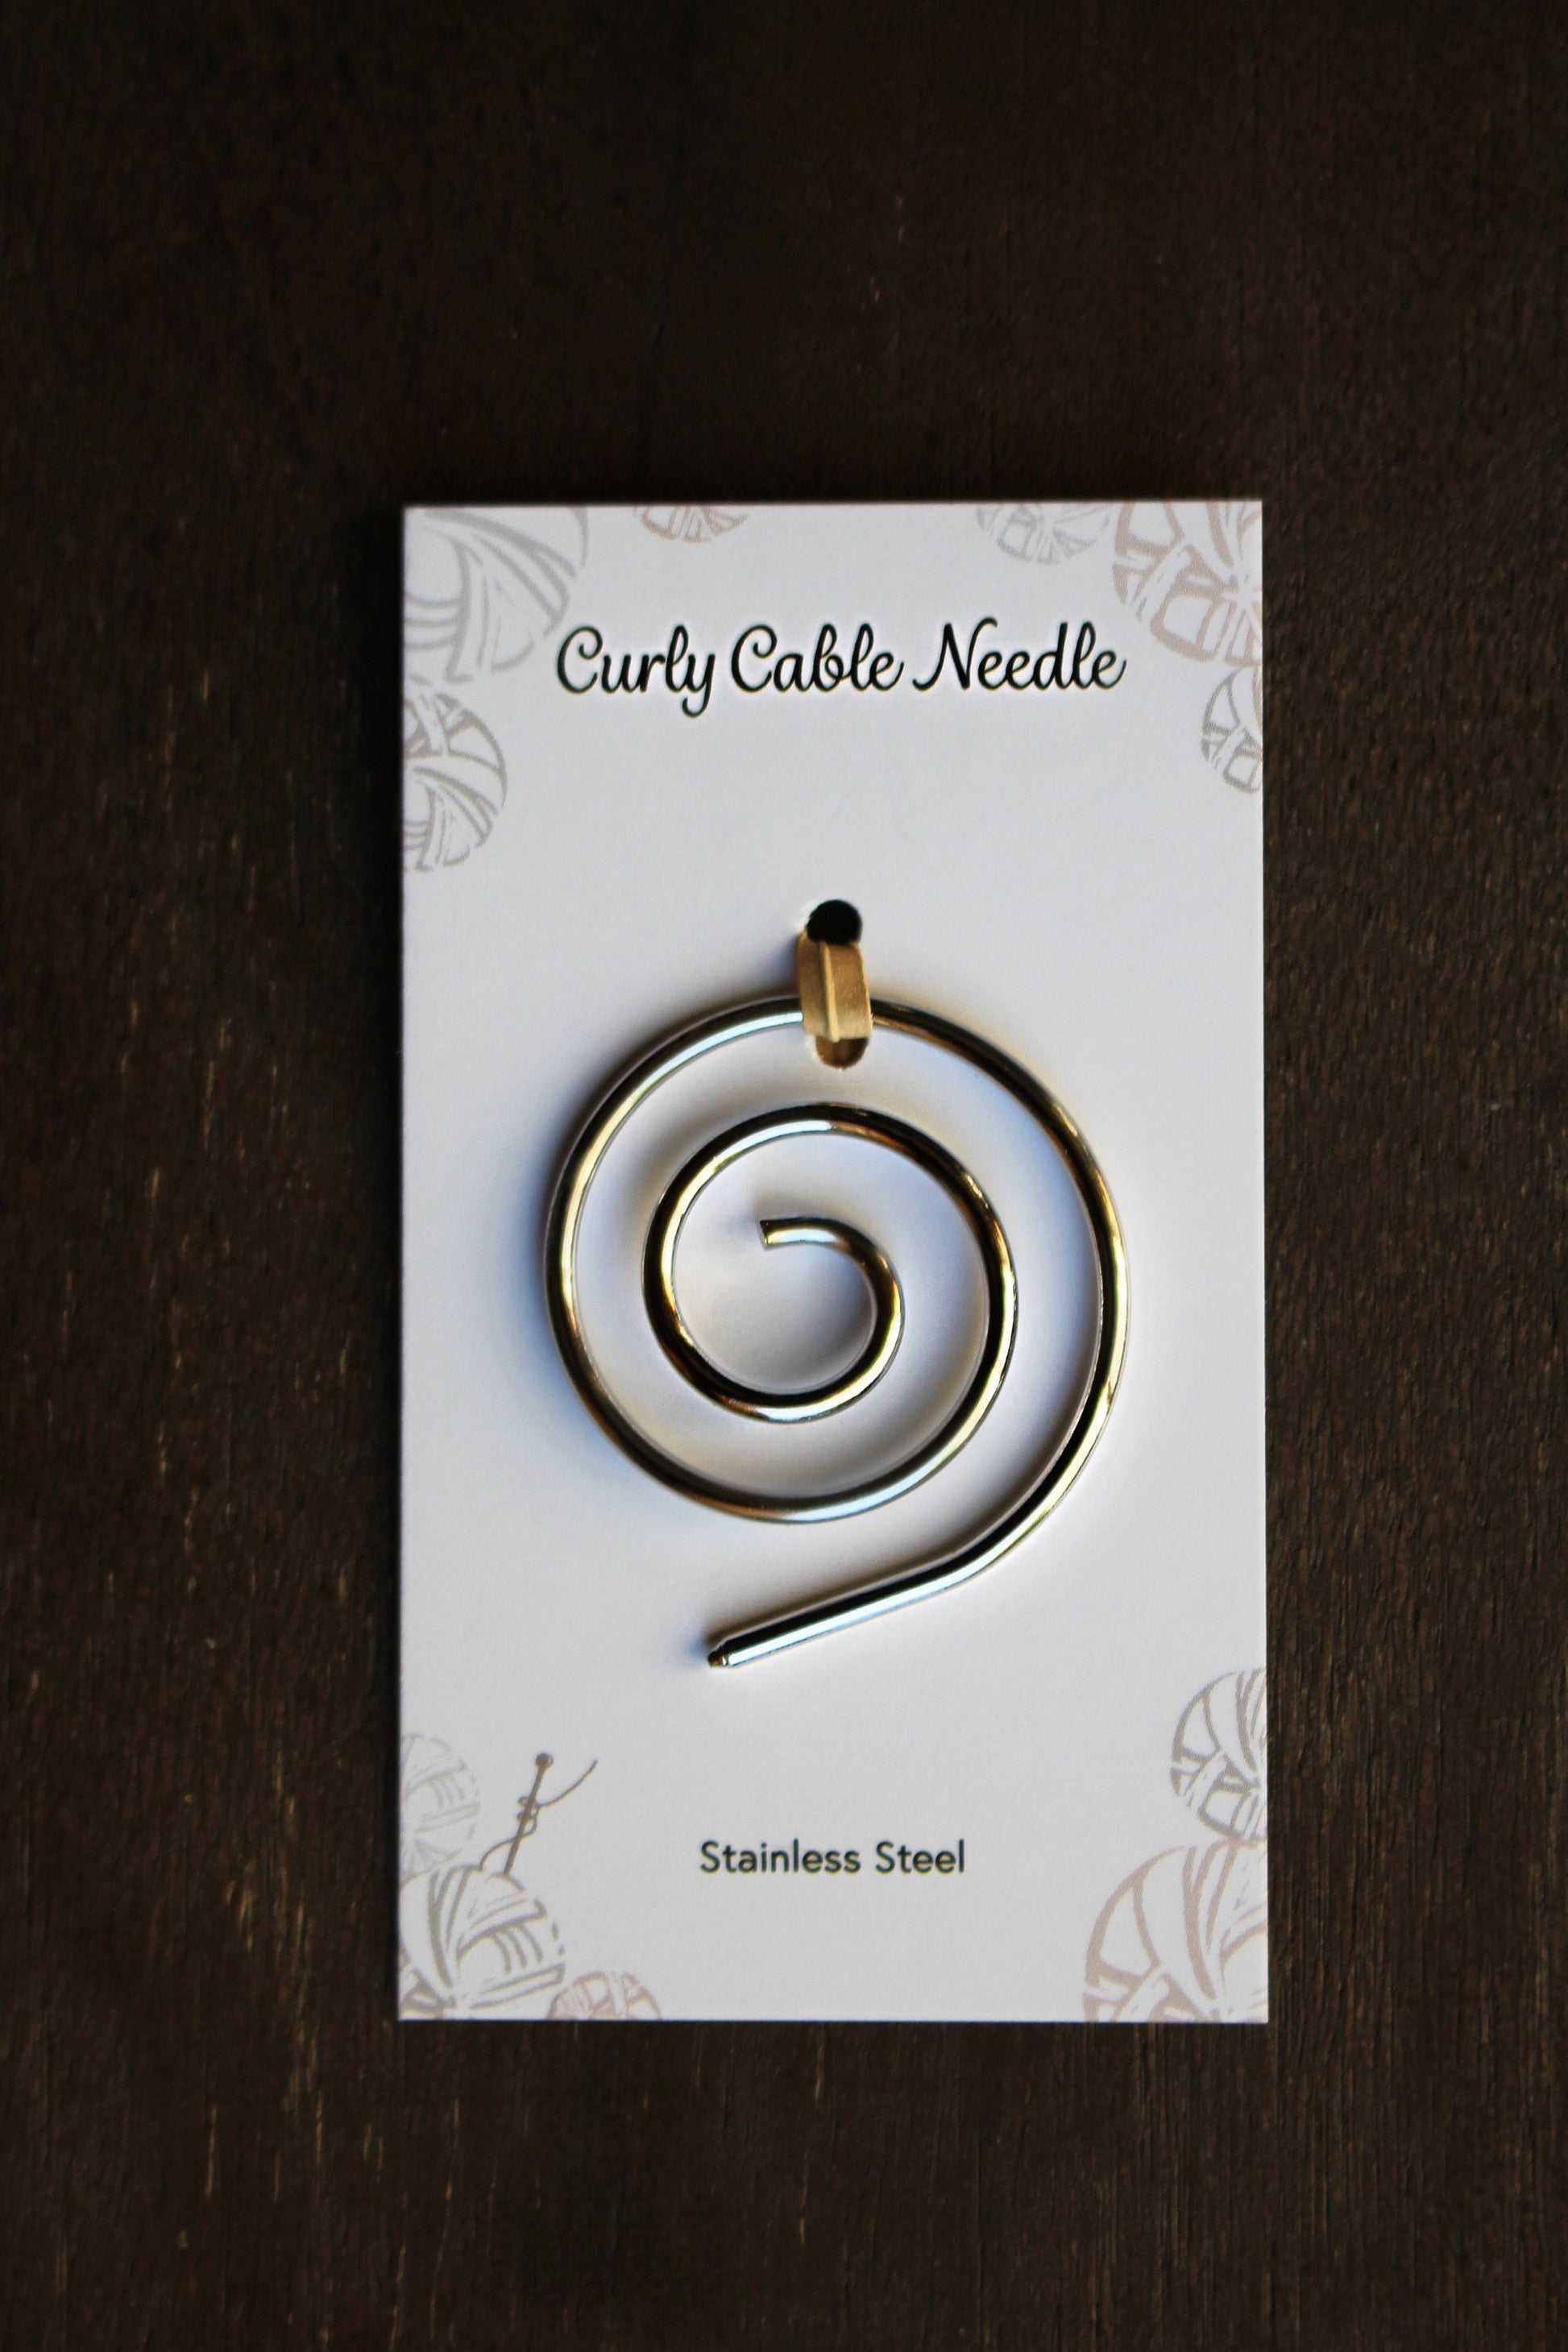 Curly Cable Needle in silver